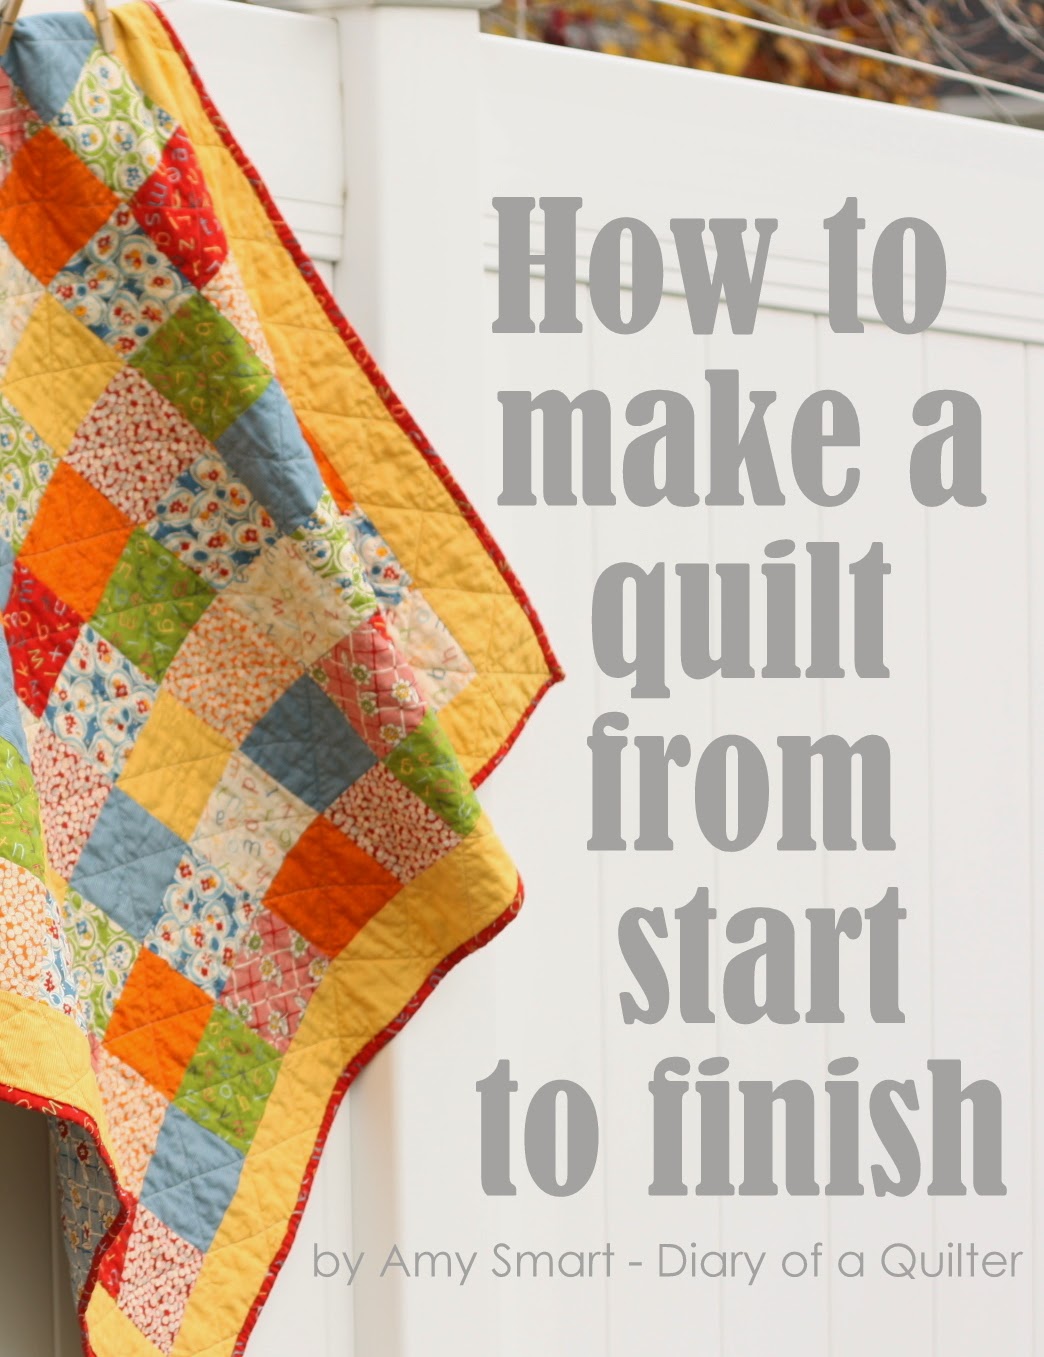 How to make a quilt from start to finish